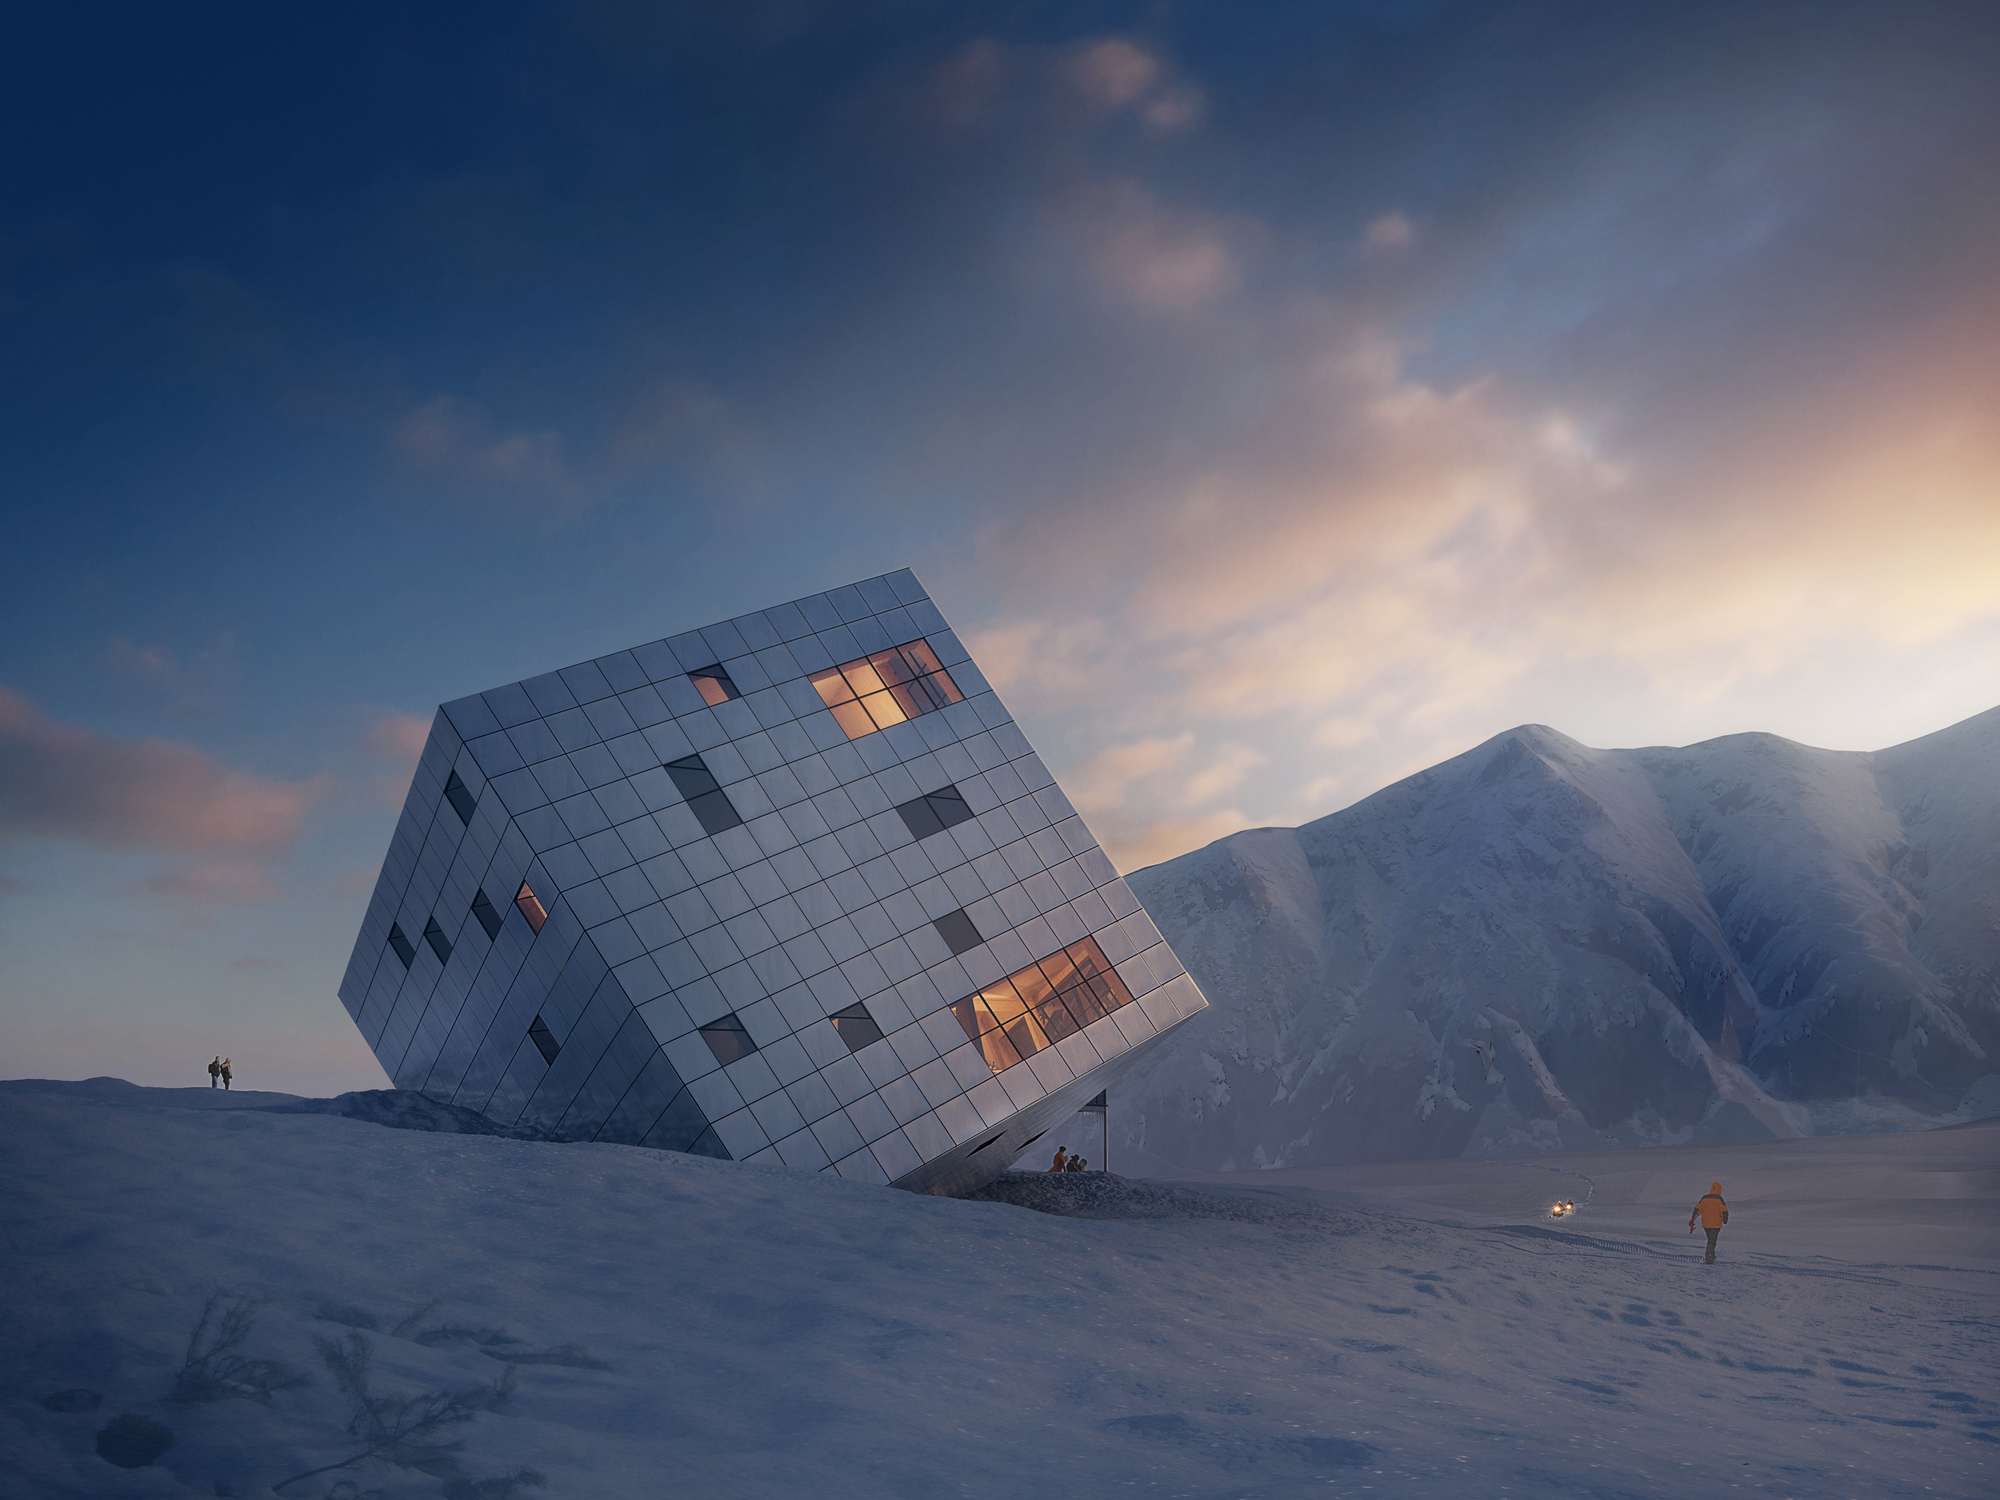 5435733dc07a80110e00008d_competition-entry-atelier-8000-designs-cuboidal-mountain-hut-for-slovakia-s-high-tatras_01